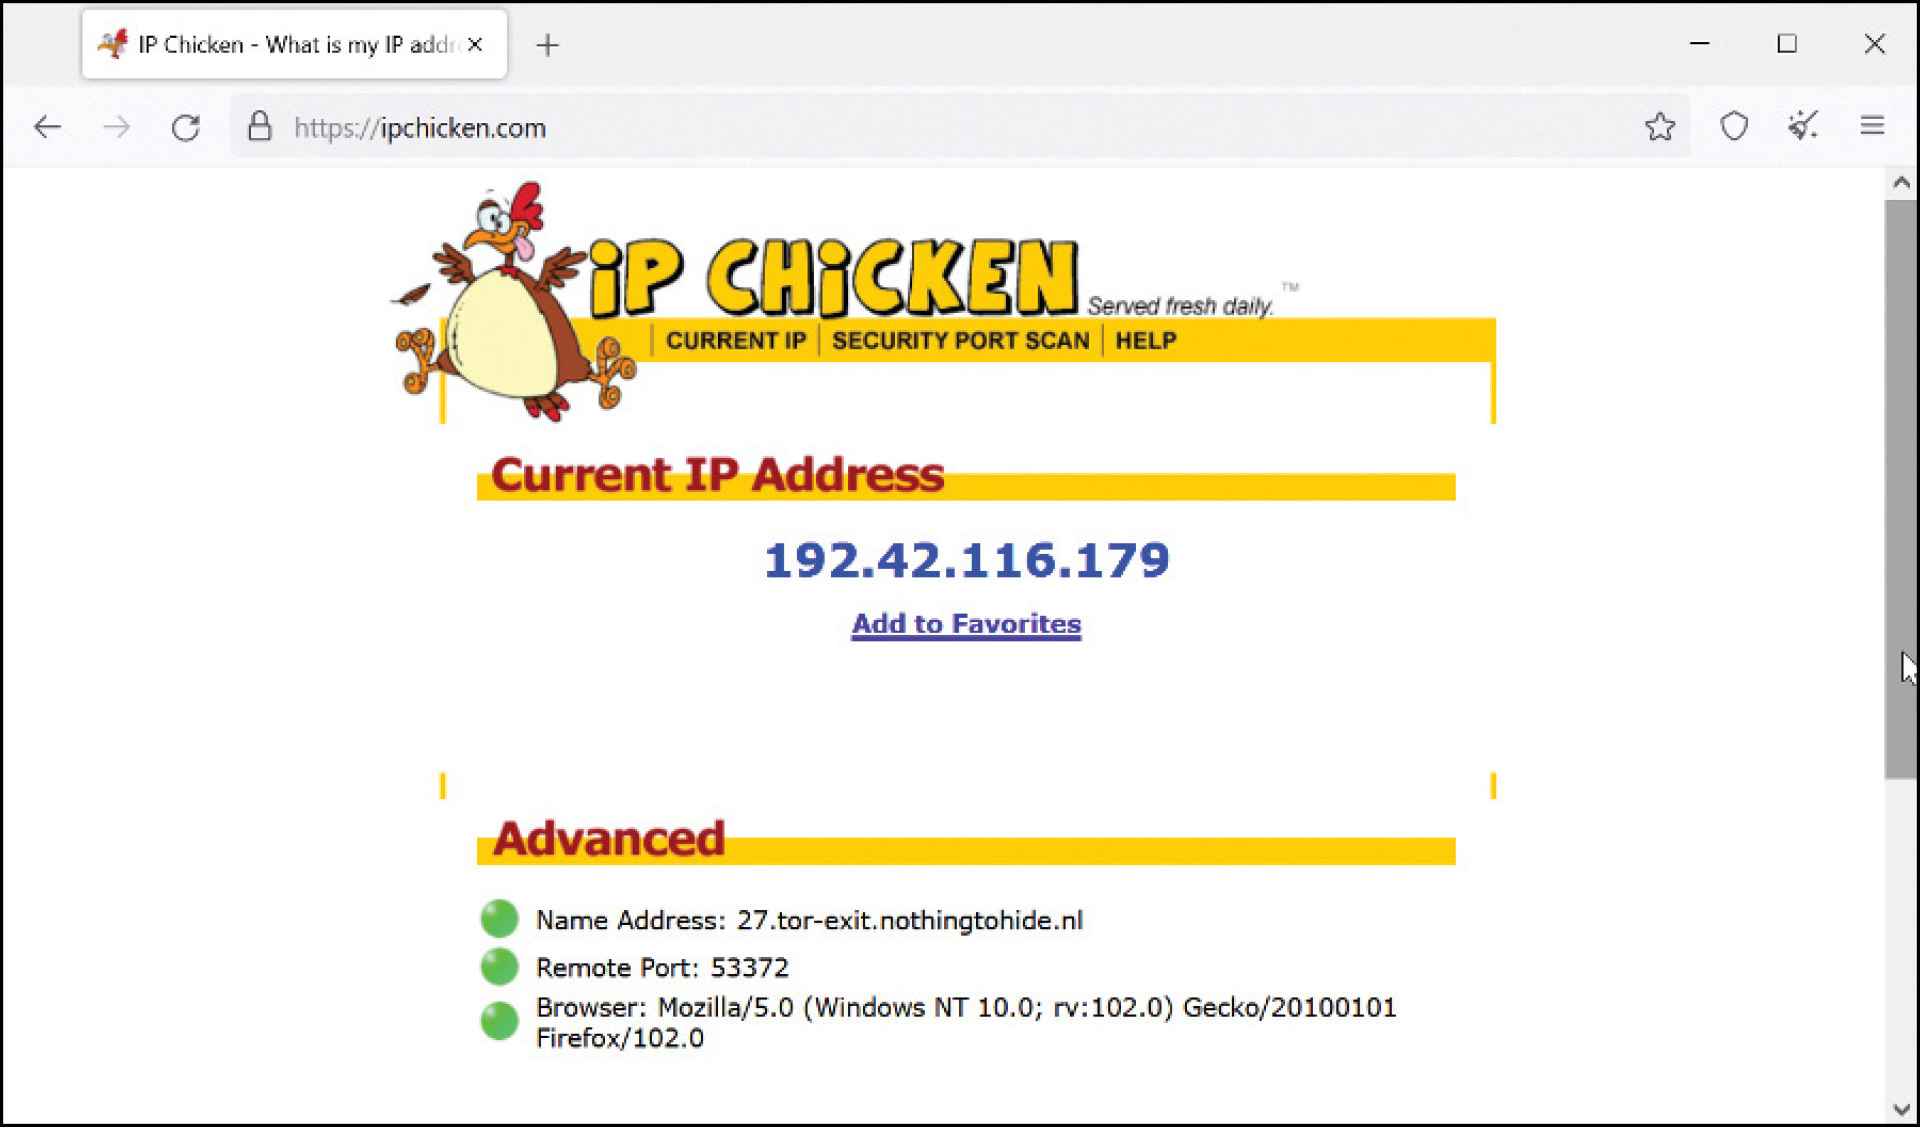 Is Ipchicken.com Legit or a Scam? Info, Reviews and Complaints